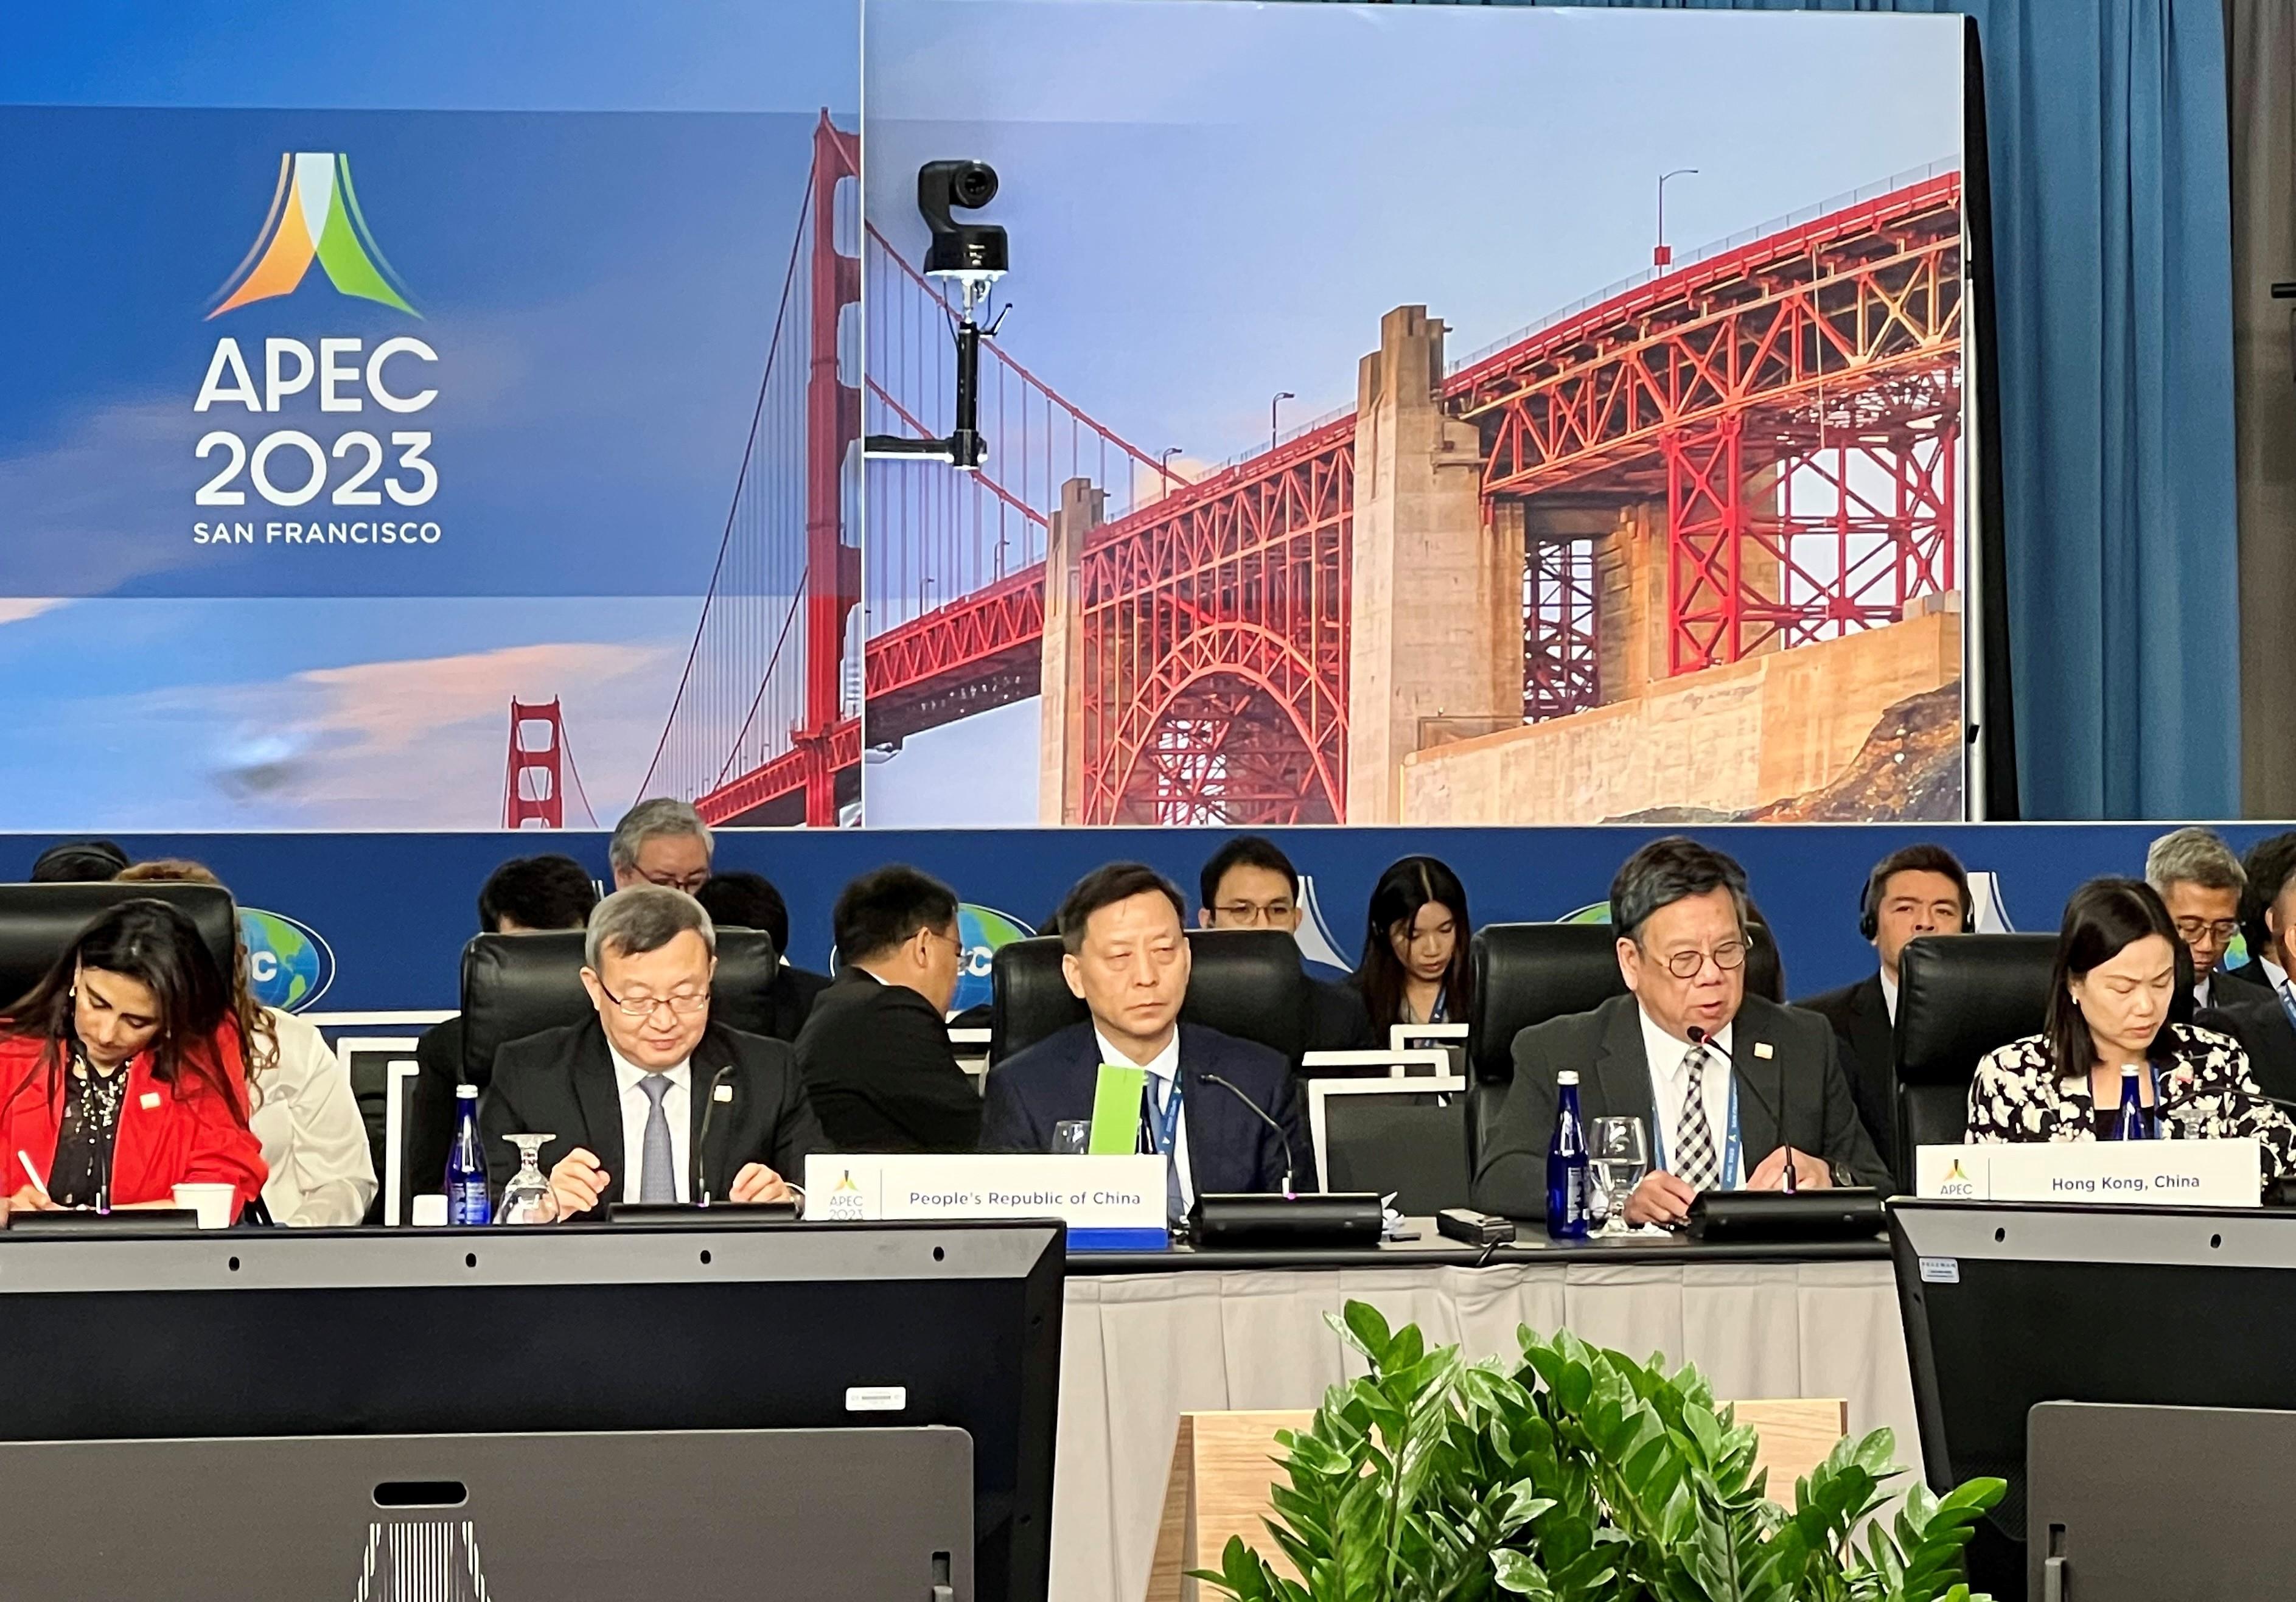 The Secretary for Commerce and Economic Development, Mr Algernon Yau (second right), speaks at the plenary session entitled "building a resilient and interconnected region that advances broad-based economic prosperity" at the 34th Asia-Pacific Economic Cooperation Ministerial Meeting in San Francisco, the United States, today (November 15, San Francisco time). The Director-General of Trade and Industry, Ms Maggie Wong (first right), also attended the plenary session.